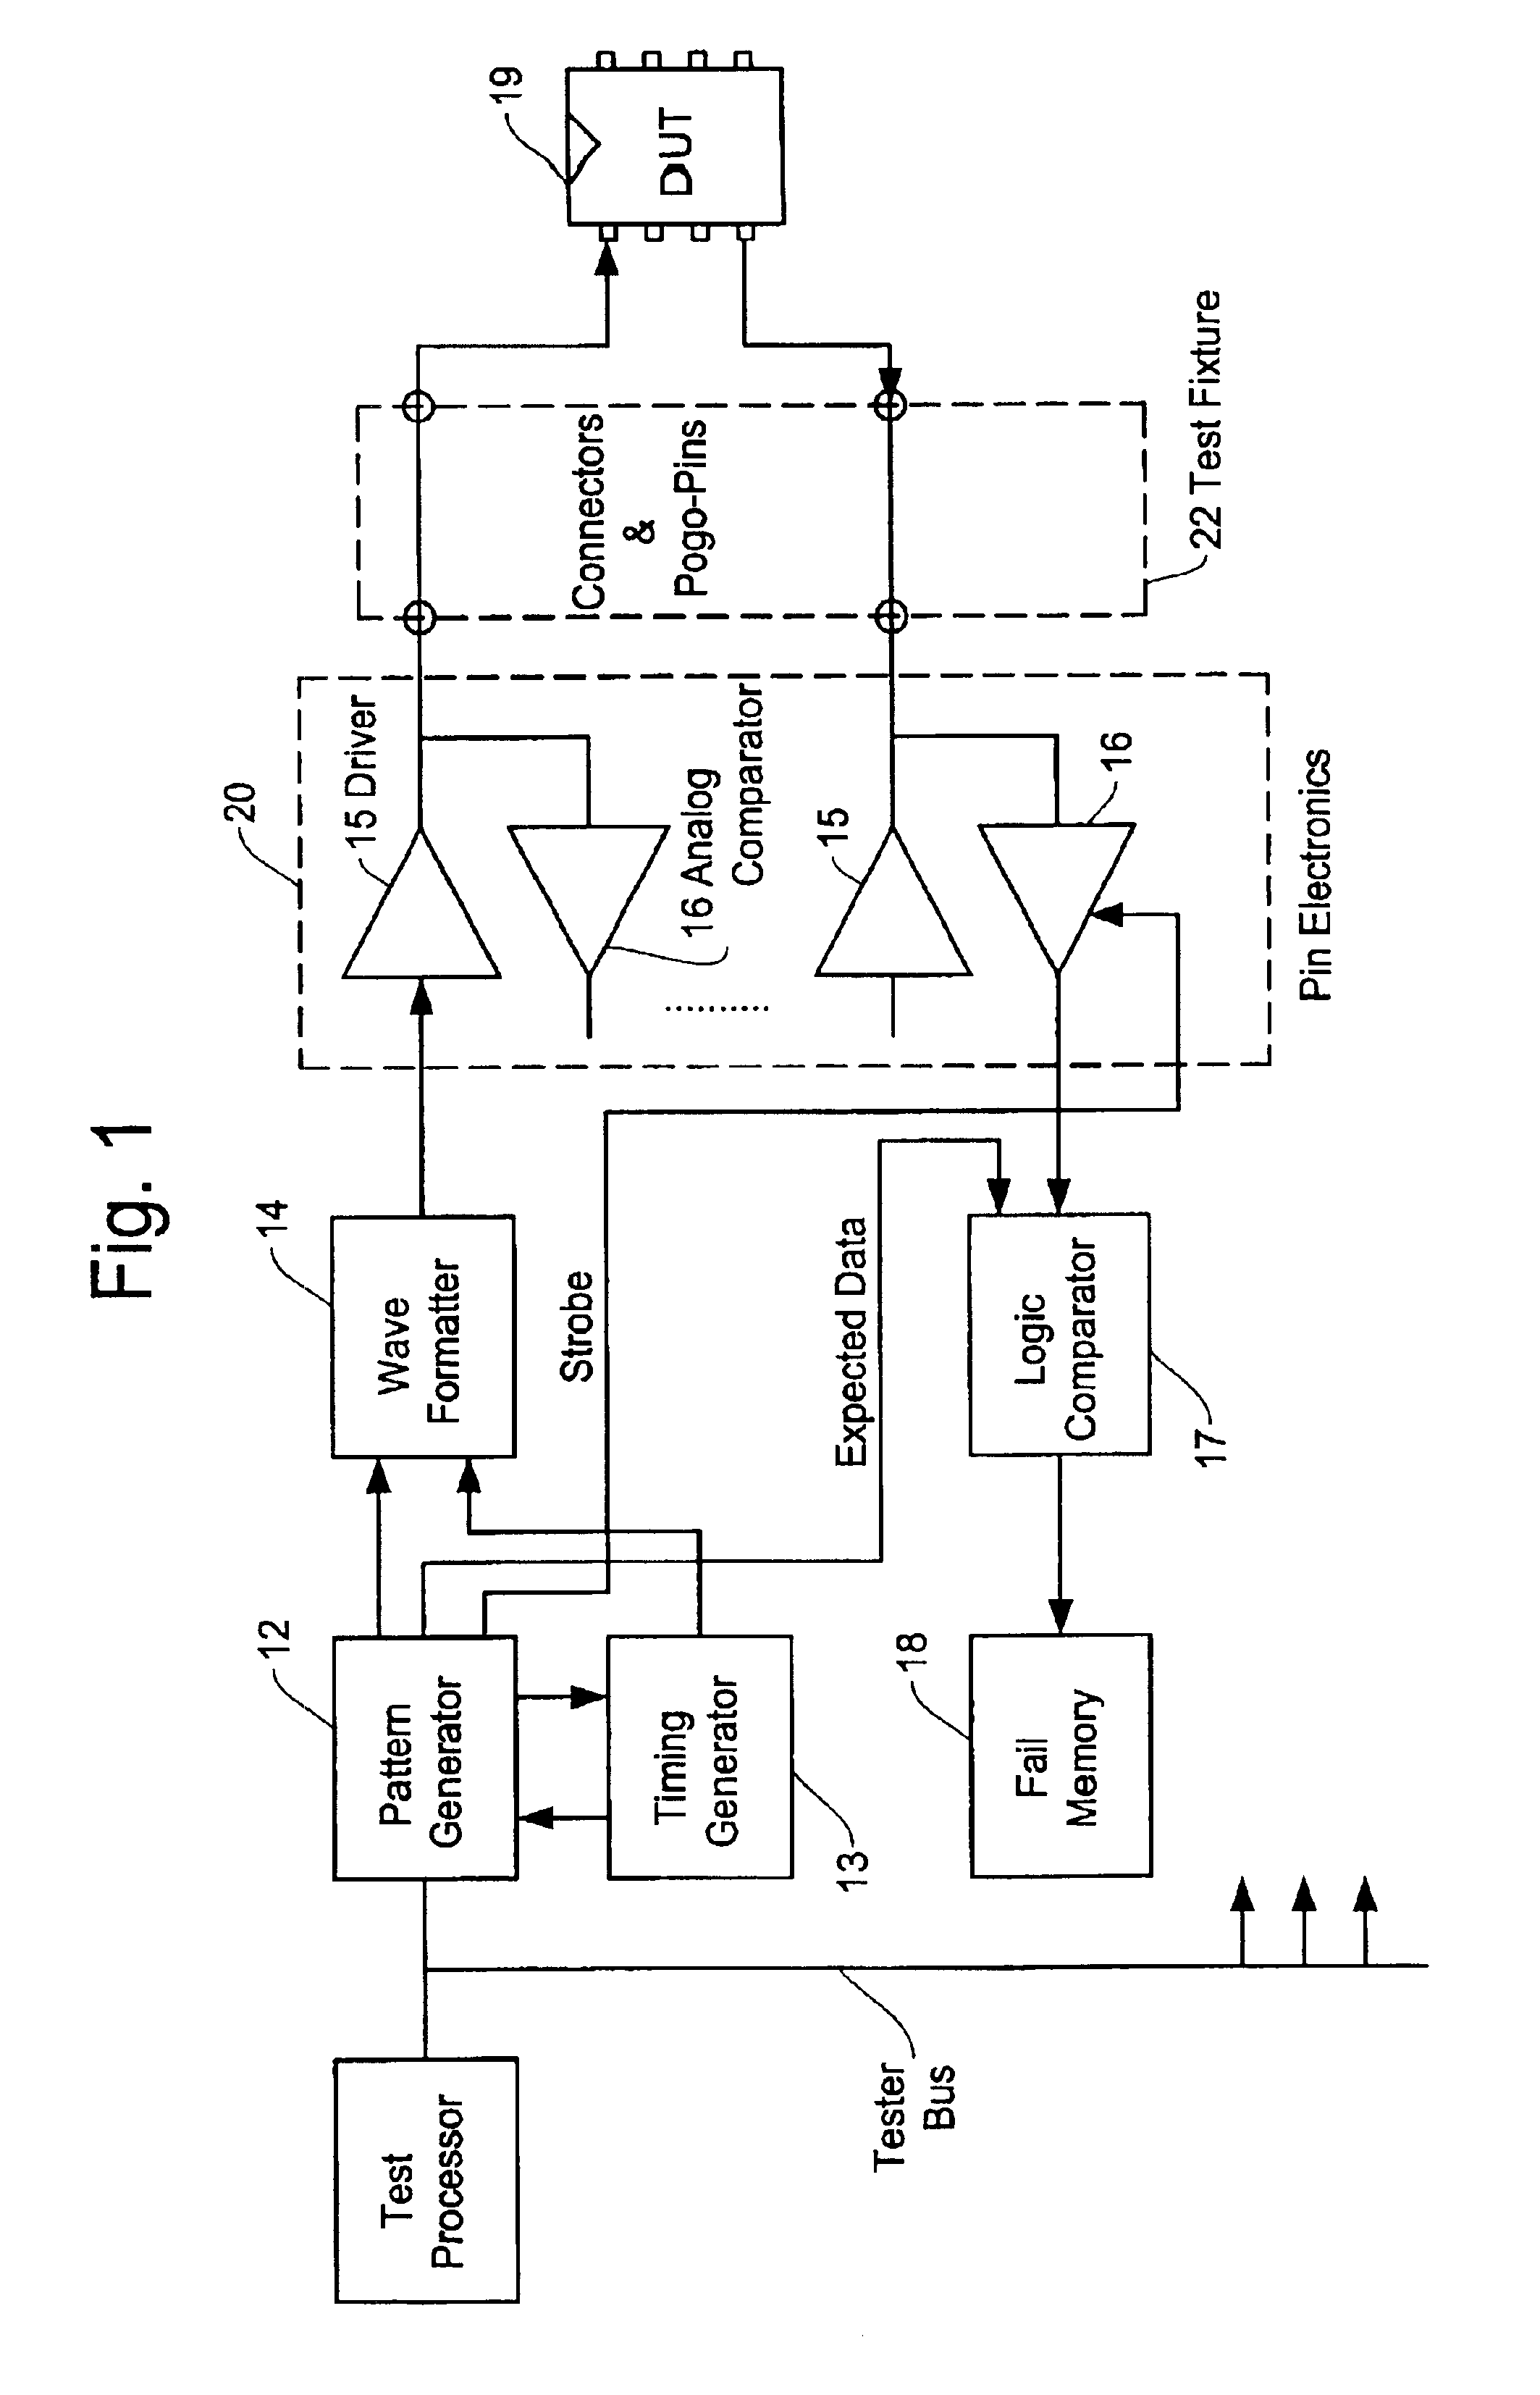 Comparator circuit for semiconductor test system